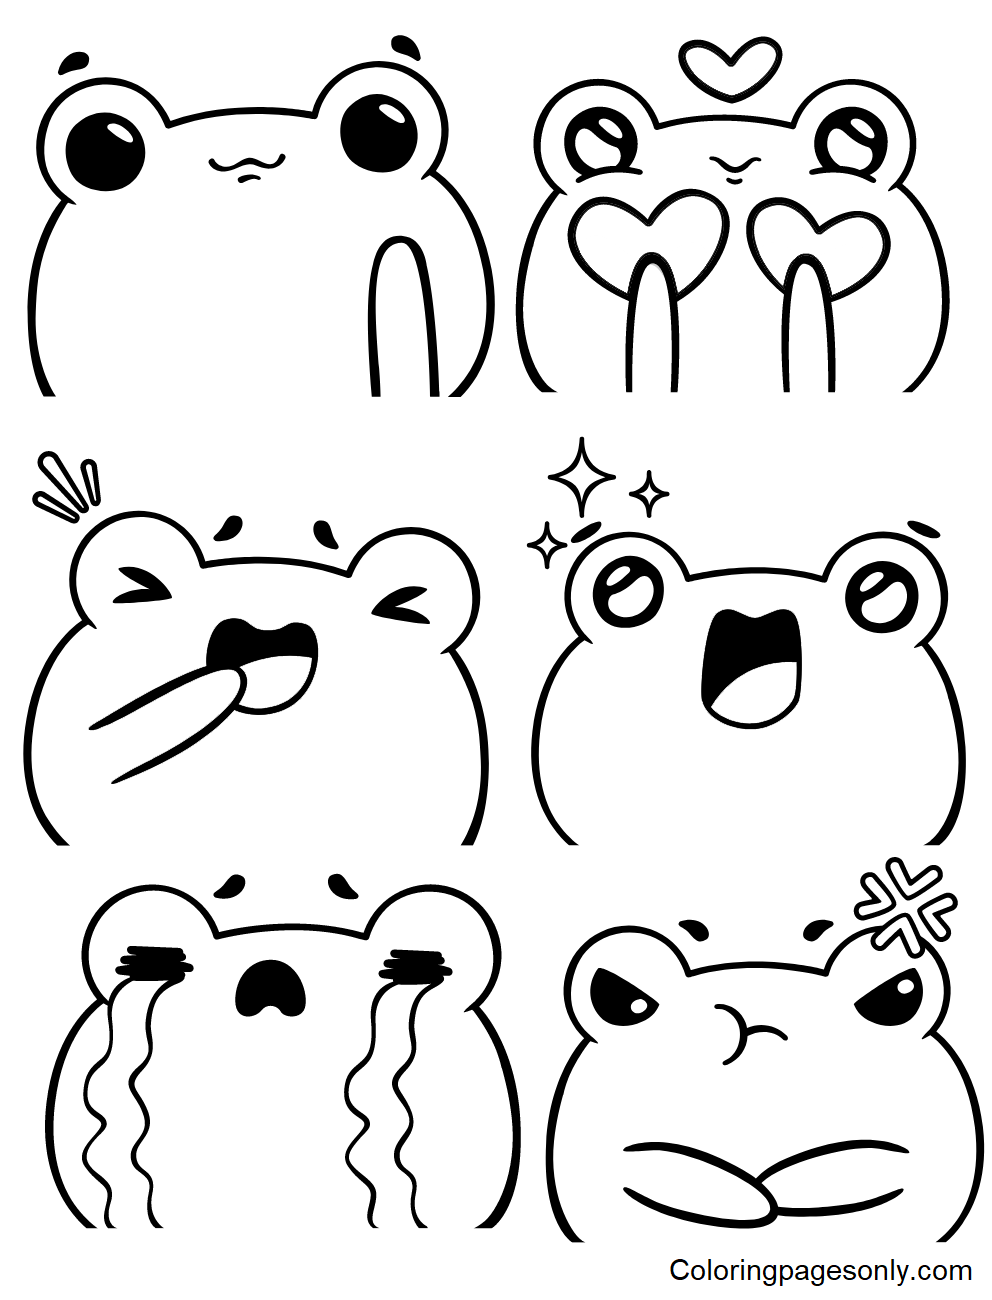 Stickers coloring pages printable for free download